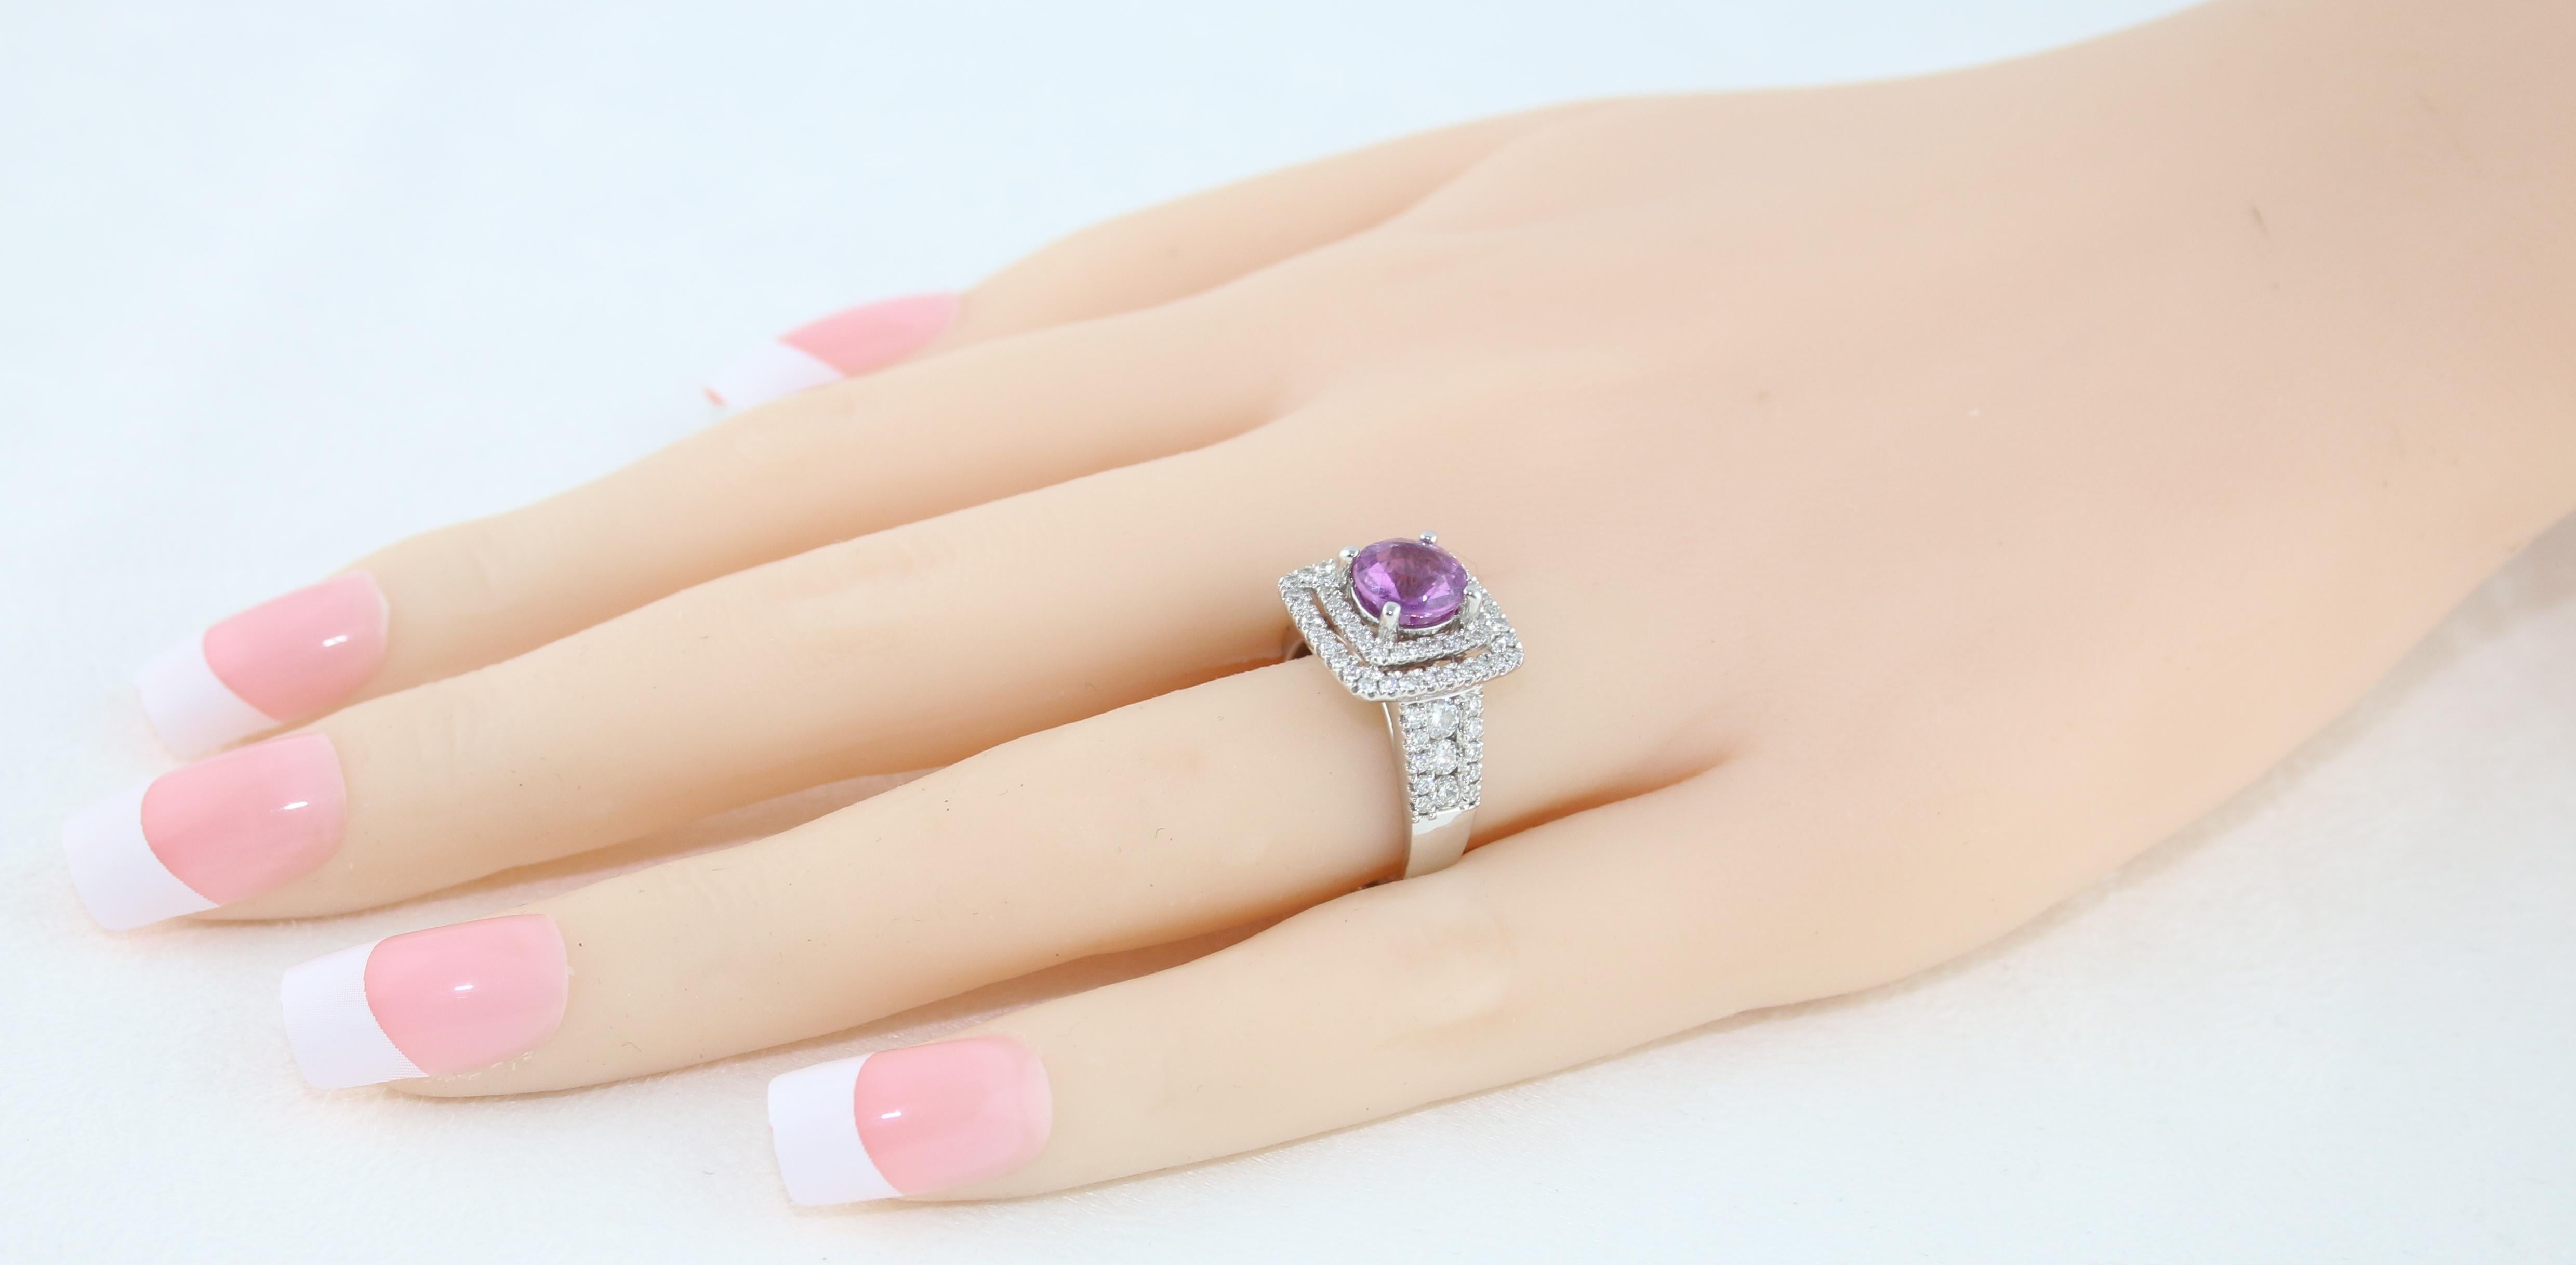 Certified No Heat 1.97 Carat Pinkish Violet Sapphire Diamond Gold Ring For Sale 1